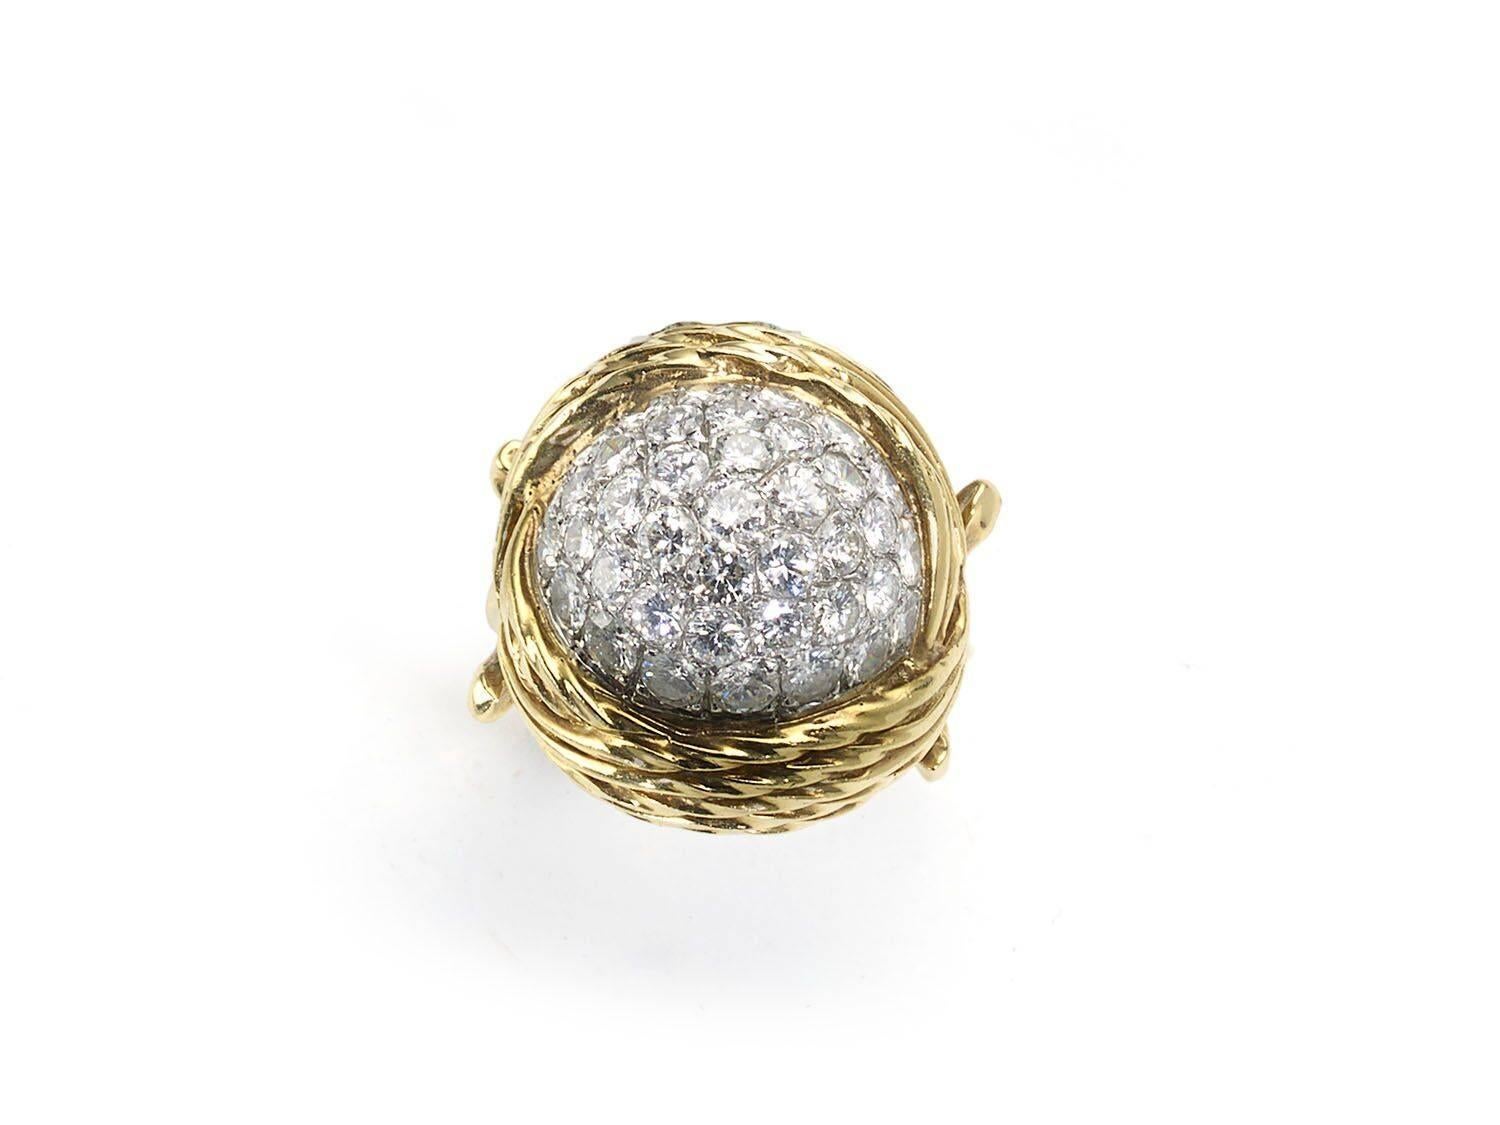 A diamond and gold bombé ring, with a pavé set centre, of round brilliant-cut diamonds, with an estimated total weight of 3.50ct, with a multi-row bark finish surround of twisted wire work, mounted in 18ct gold. Circa 1960s.

Finger size M / USA